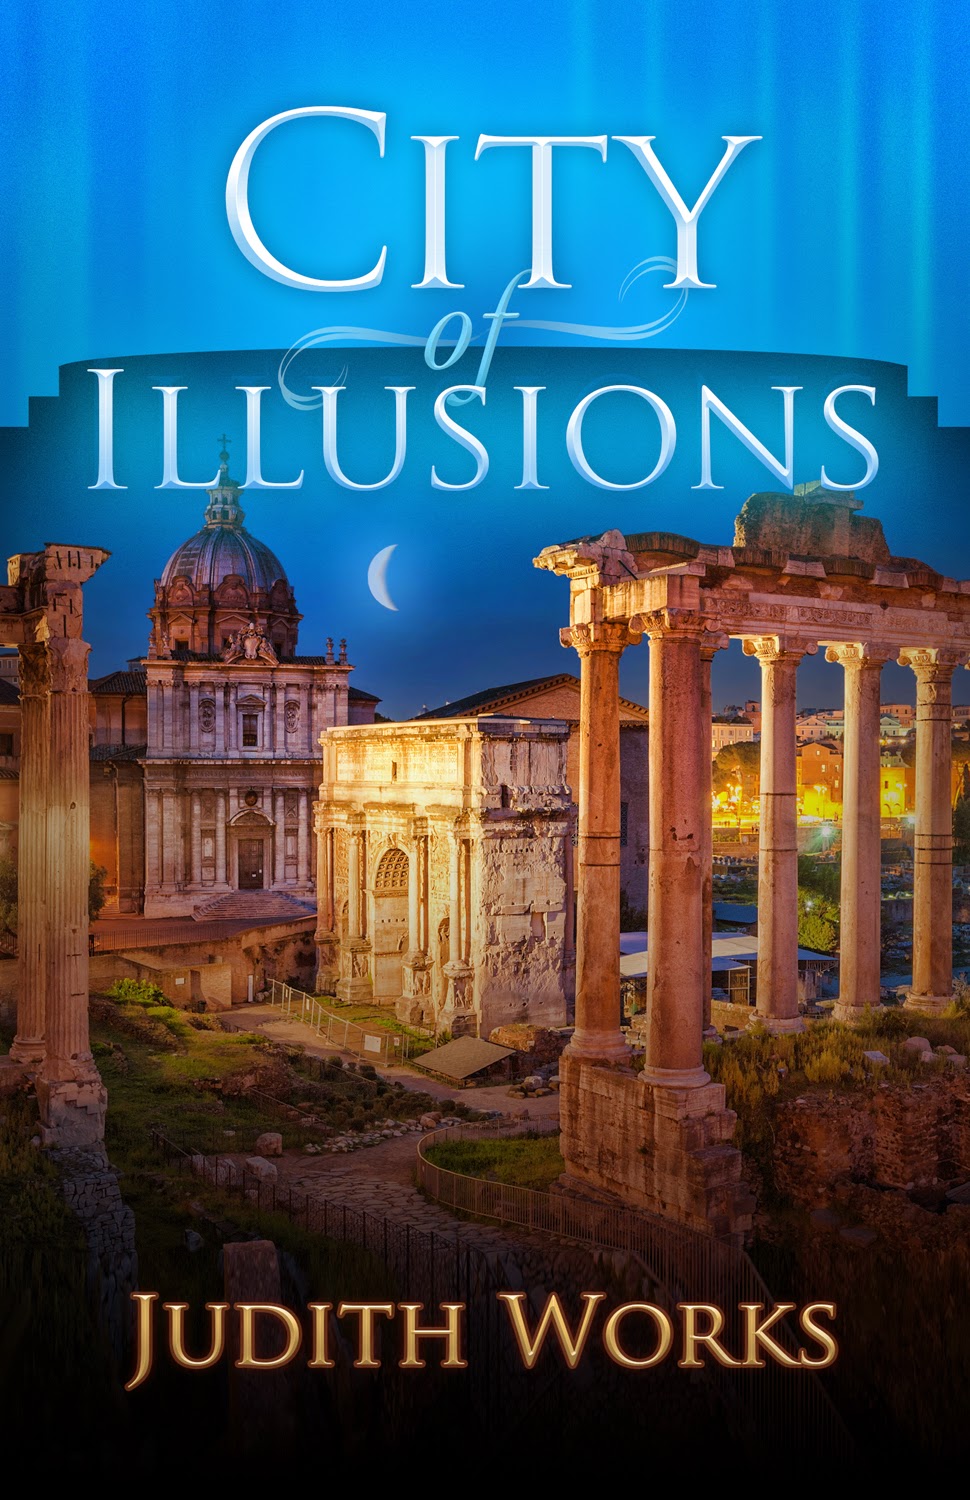 Edgar's Books: City of Illusions by Judith Works - Book Tour and Giveaway